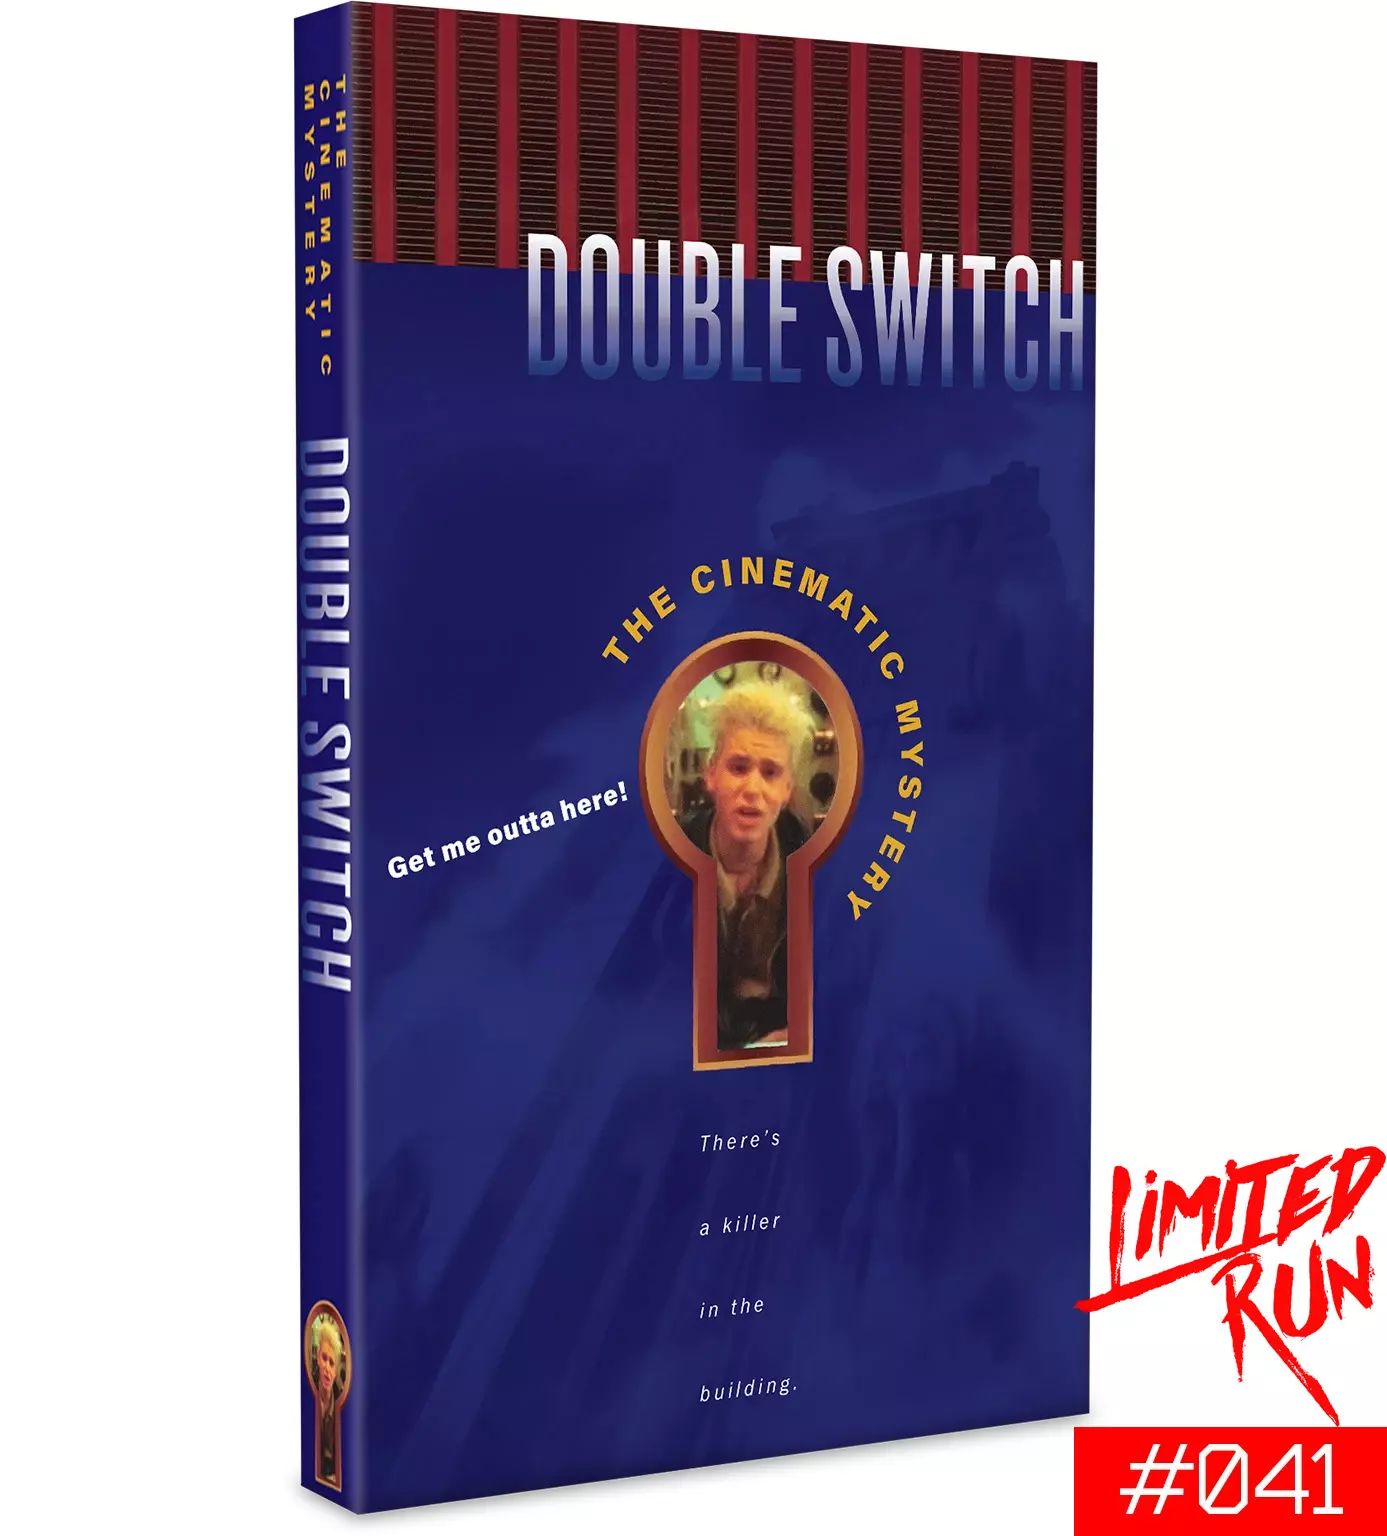 Double Switch Classic Edition Limited Run